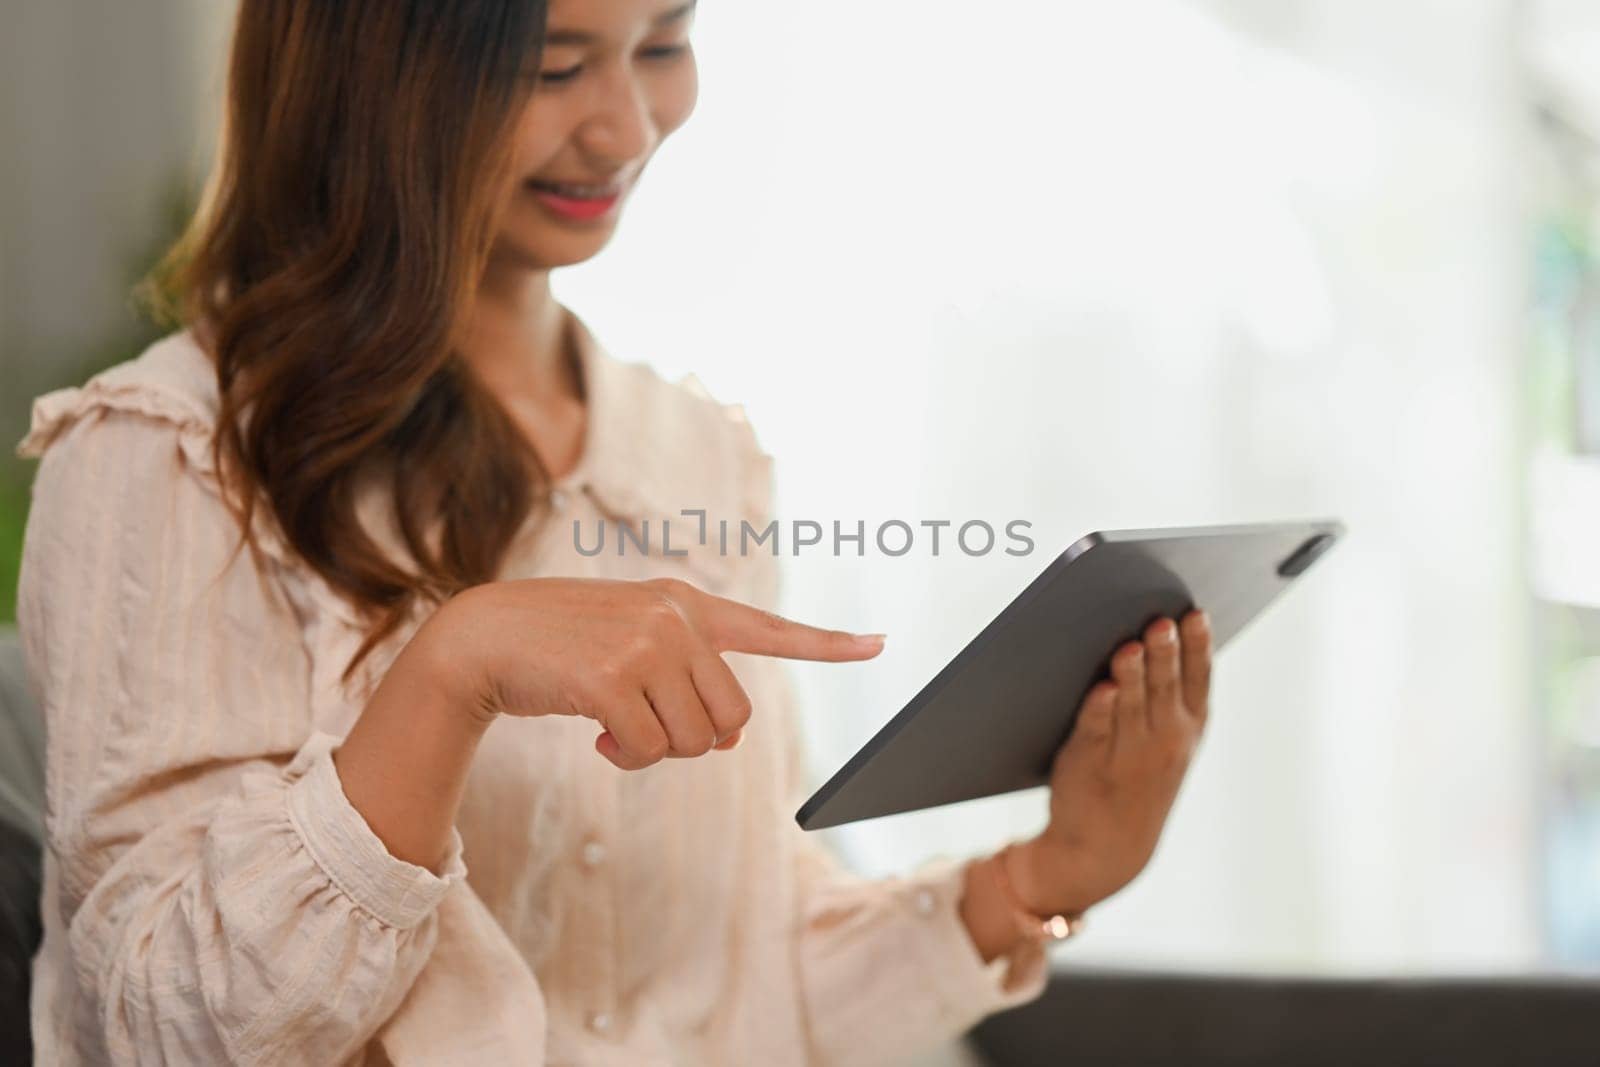 Pretty young woman browsing internet on digital tablet. People and technology concept.